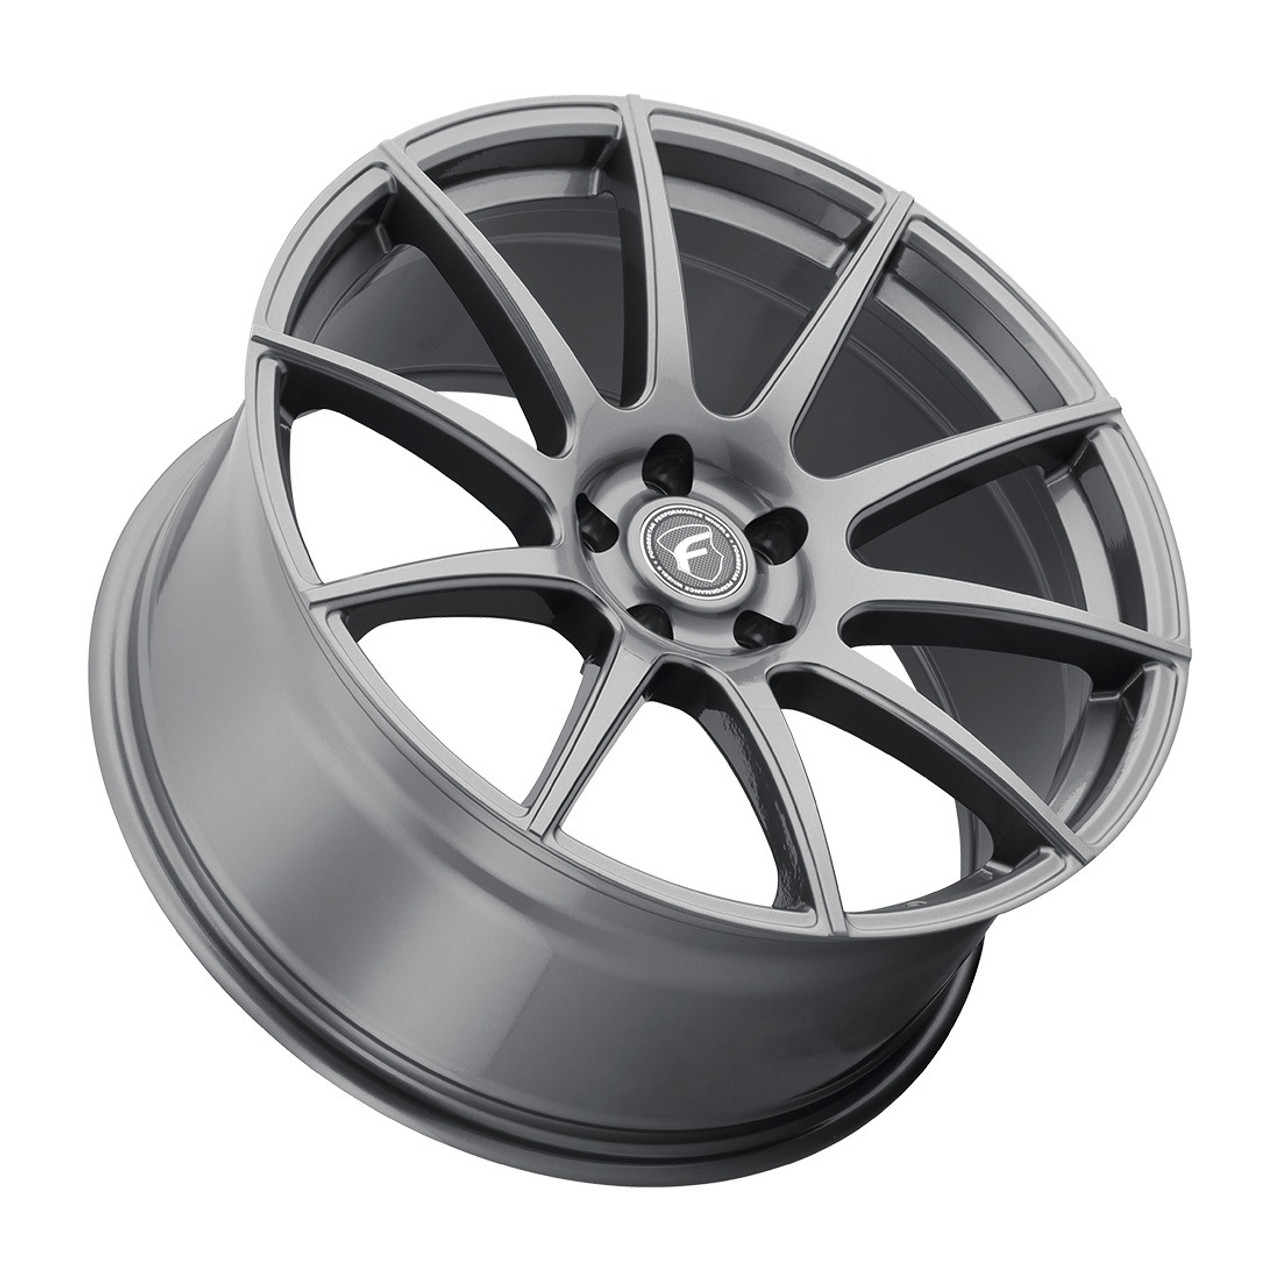 Forgestar CF10 Wheels - 19x10 Fronts / 20x12 Rears - Gloss Anthracite - C7 Corvette GS / Z06